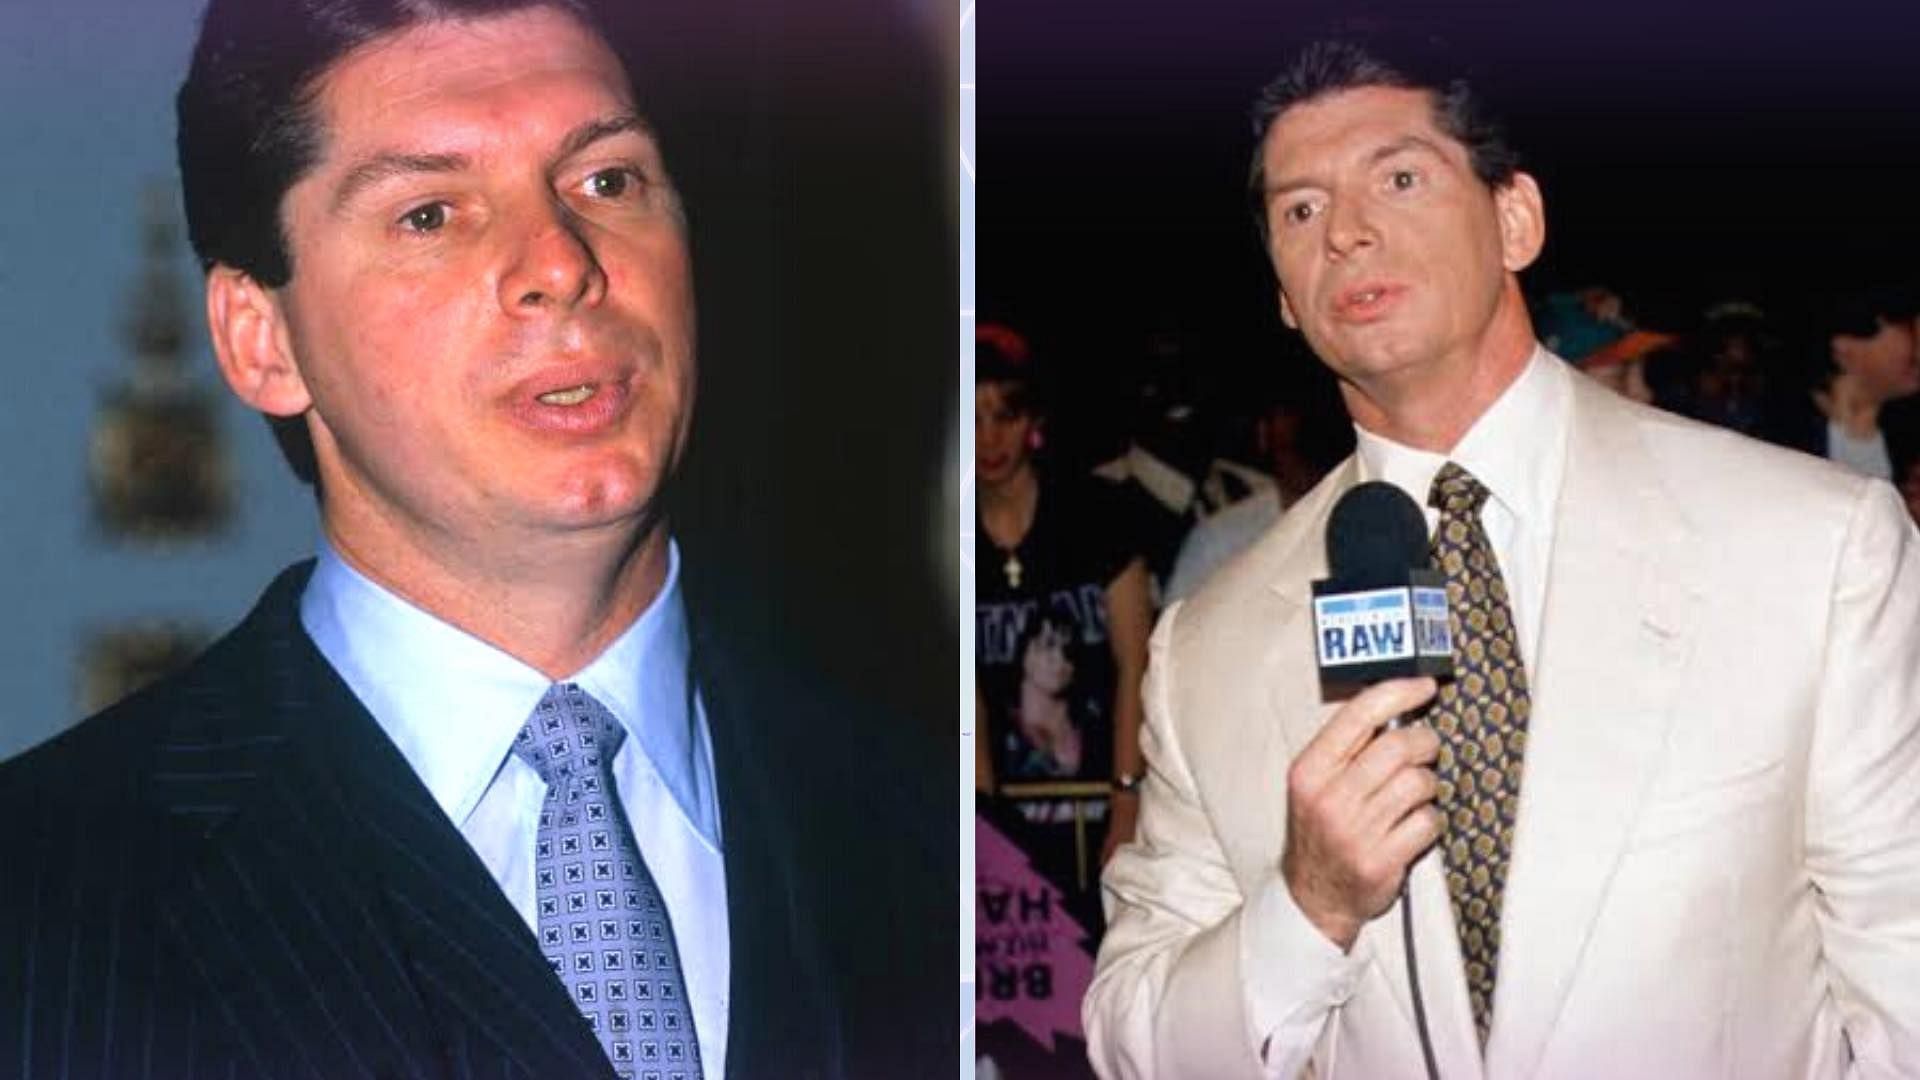 Vince McMahon is the former CEO of WWE.